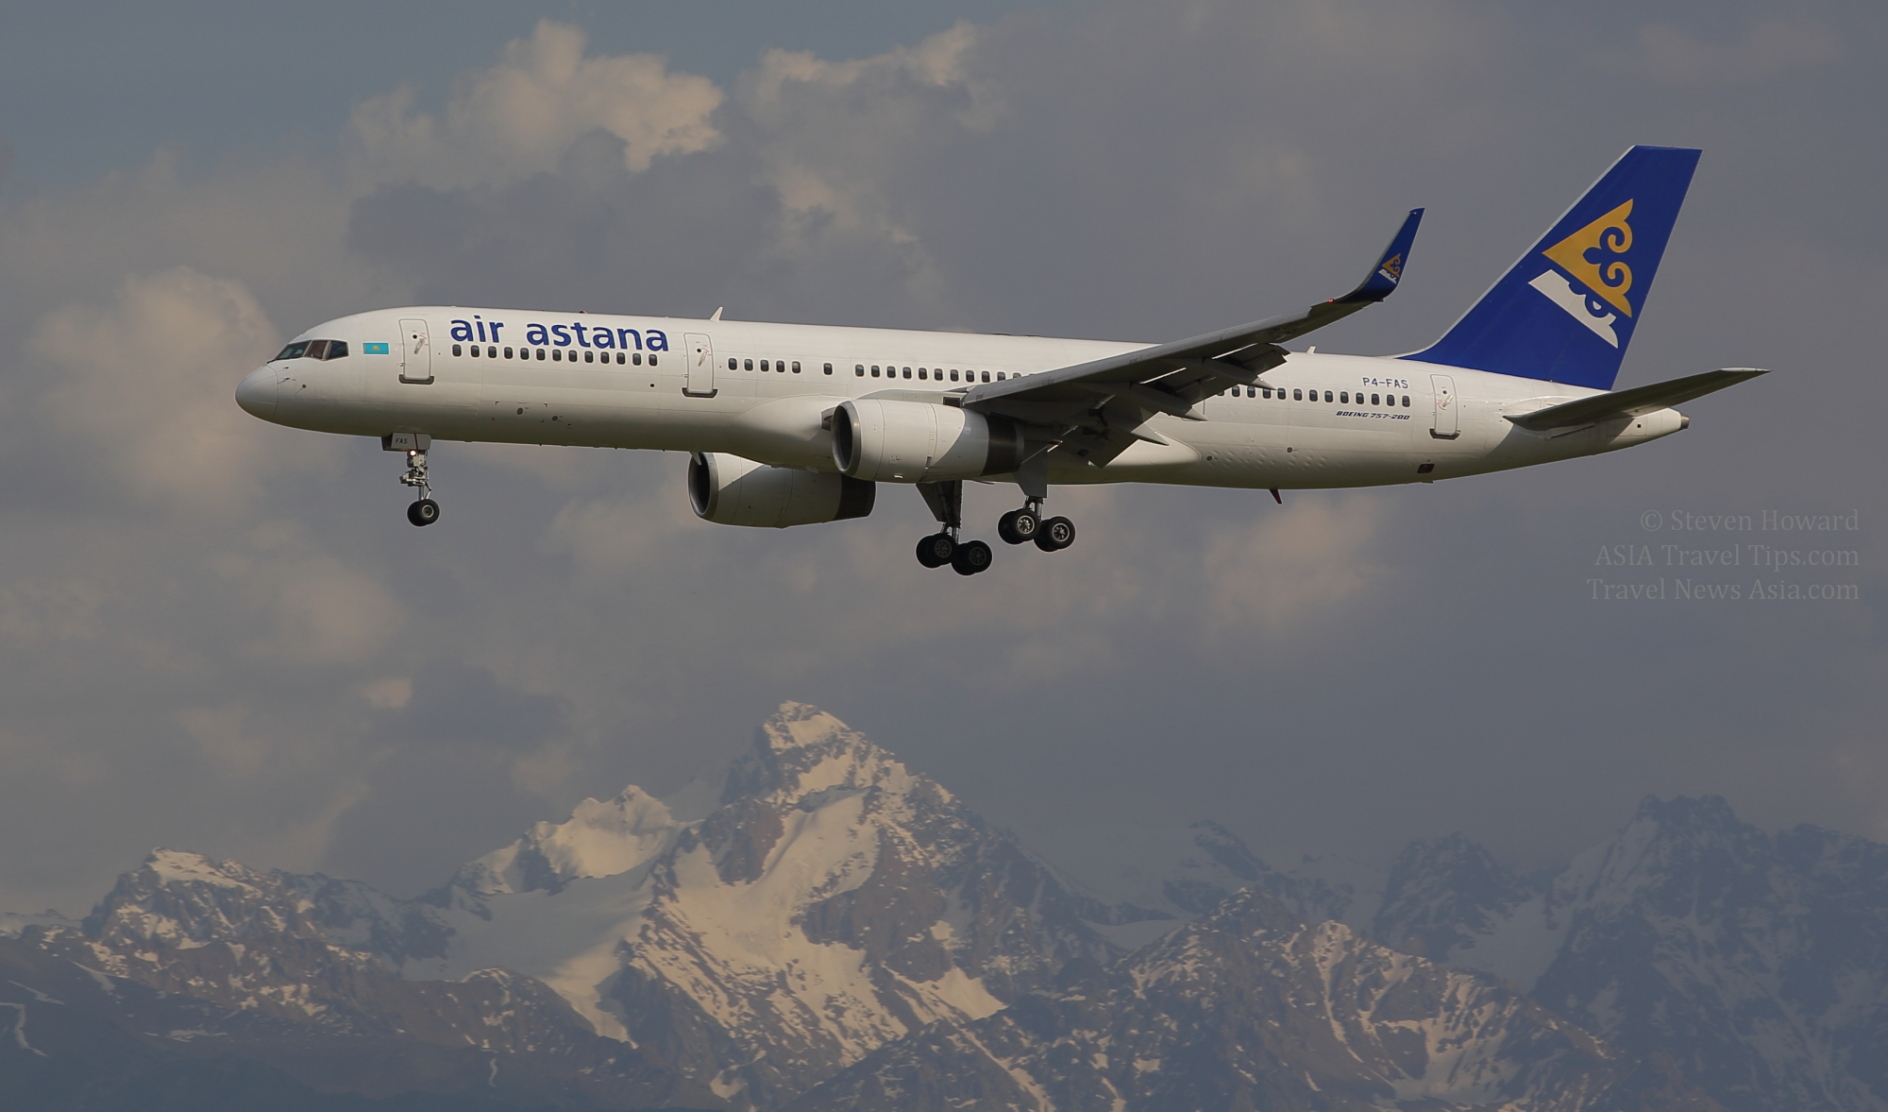 Air Astana B757 about to land in Almaty, Kazakhstan. Picture by Steven Howard of TravelNewsAsia.com Click to enlarge.